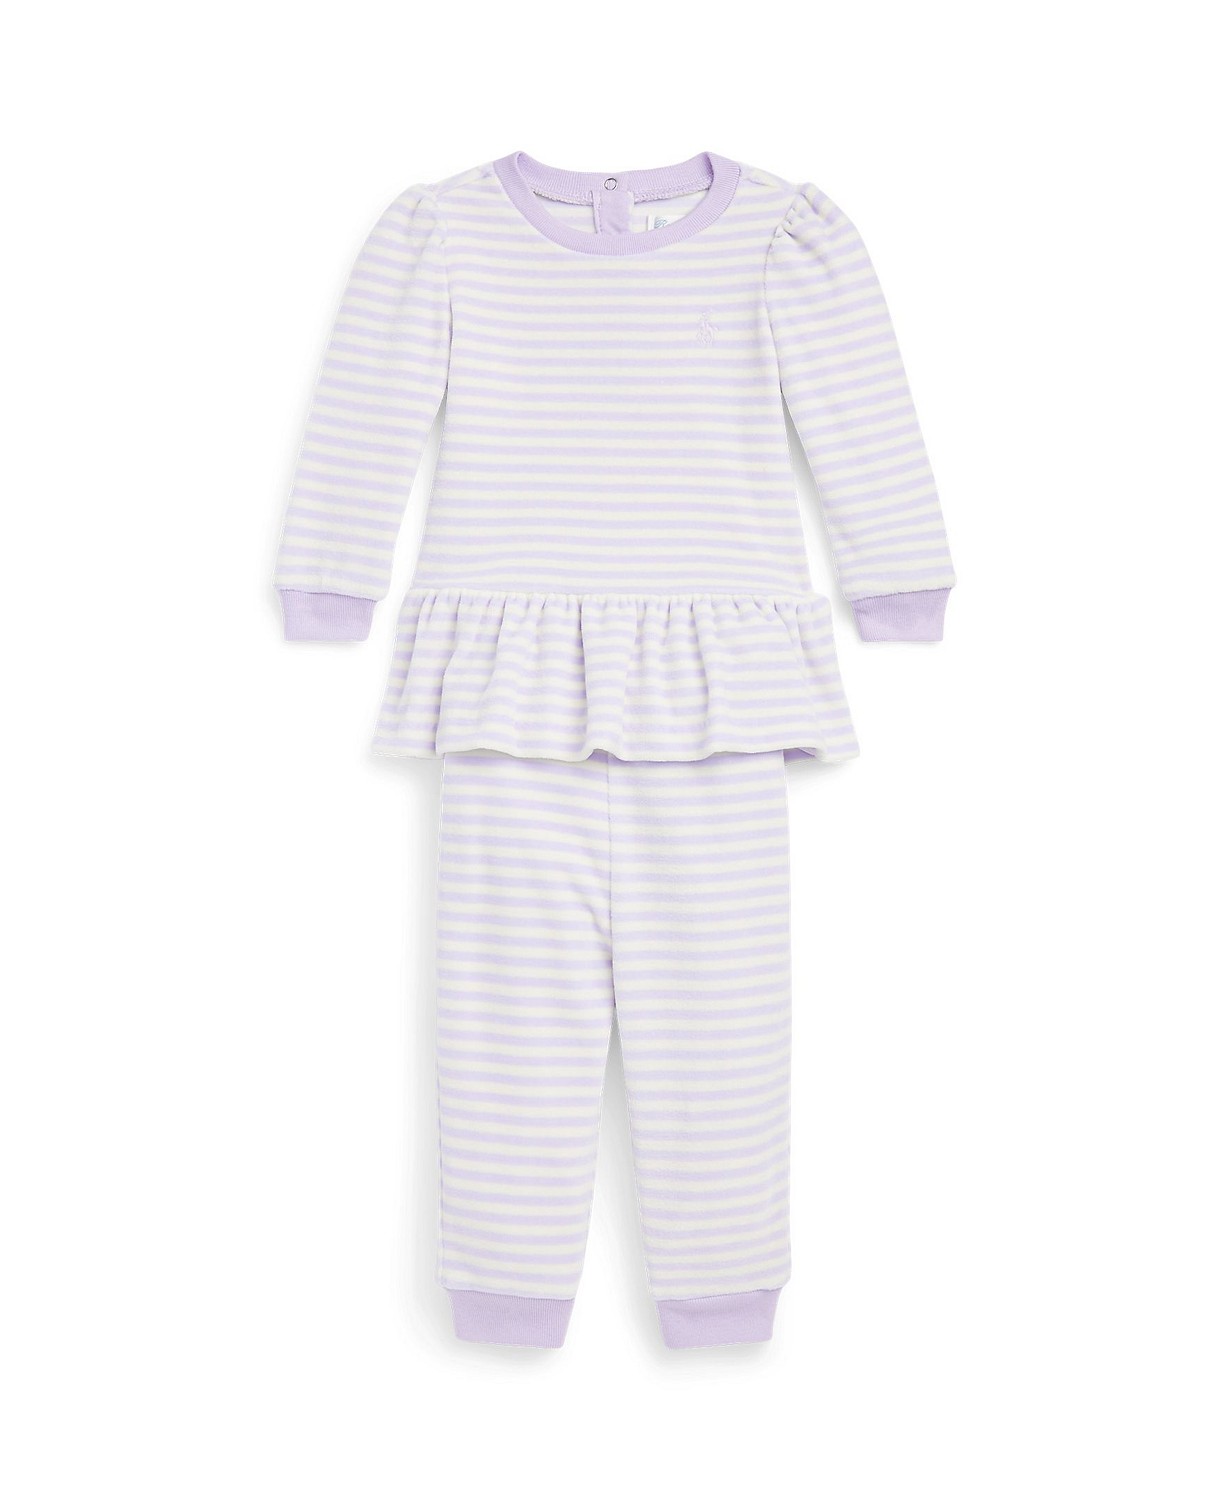 Baby Girls Striped Velour Top and Pants, 2 Piece Set